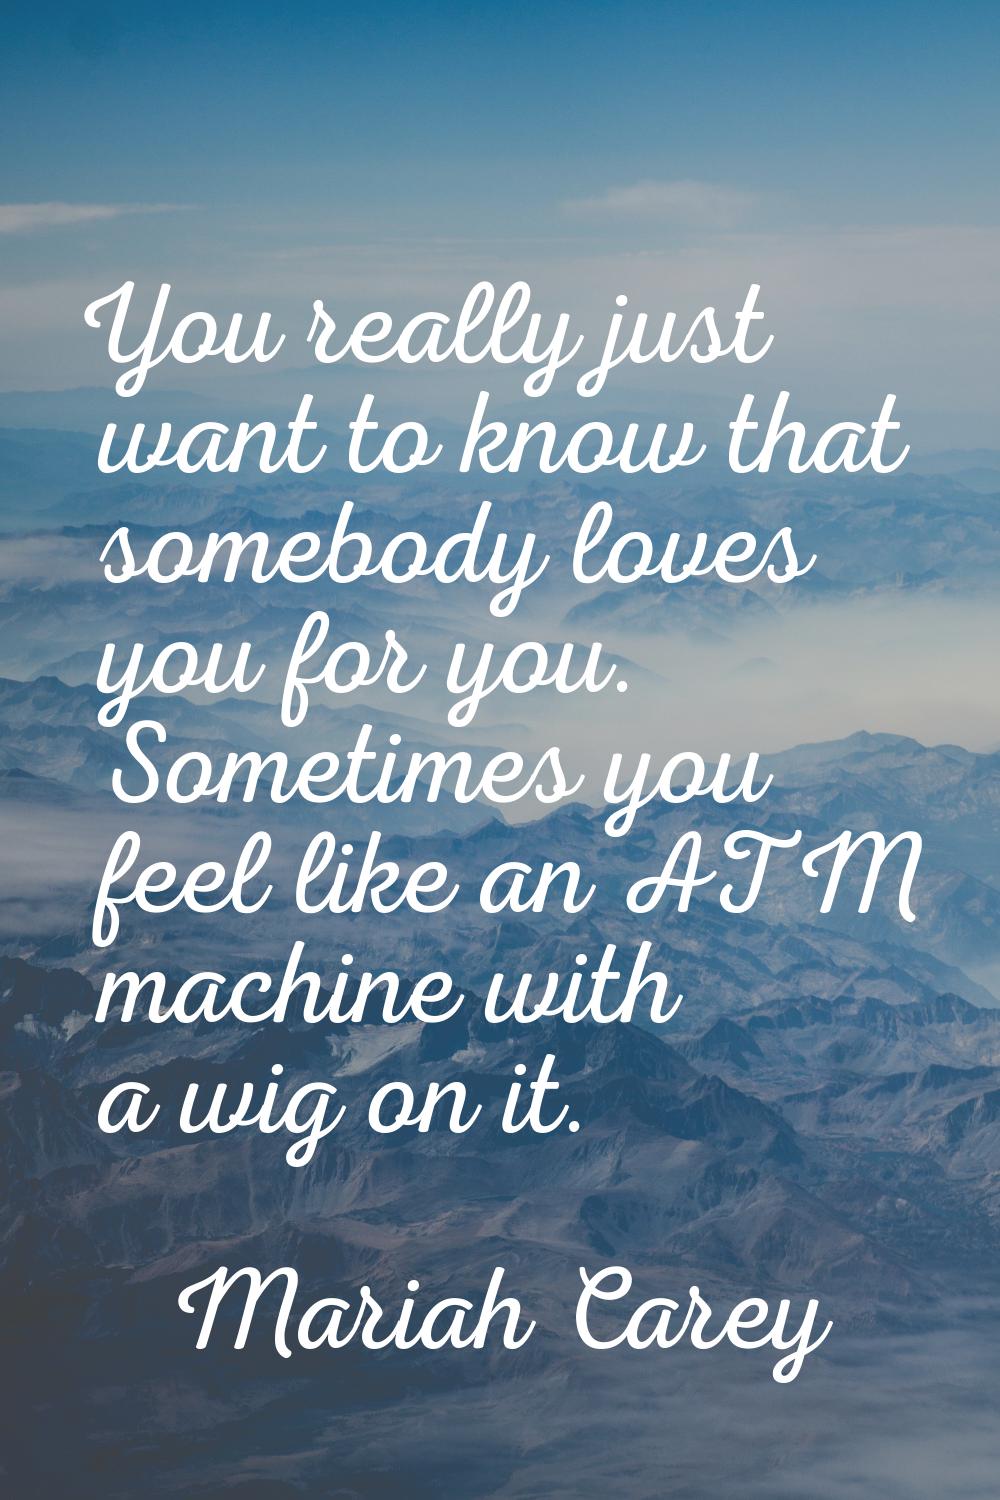 You really just want to know that somebody loves you for you. Sometimes you feel like an ATM machin